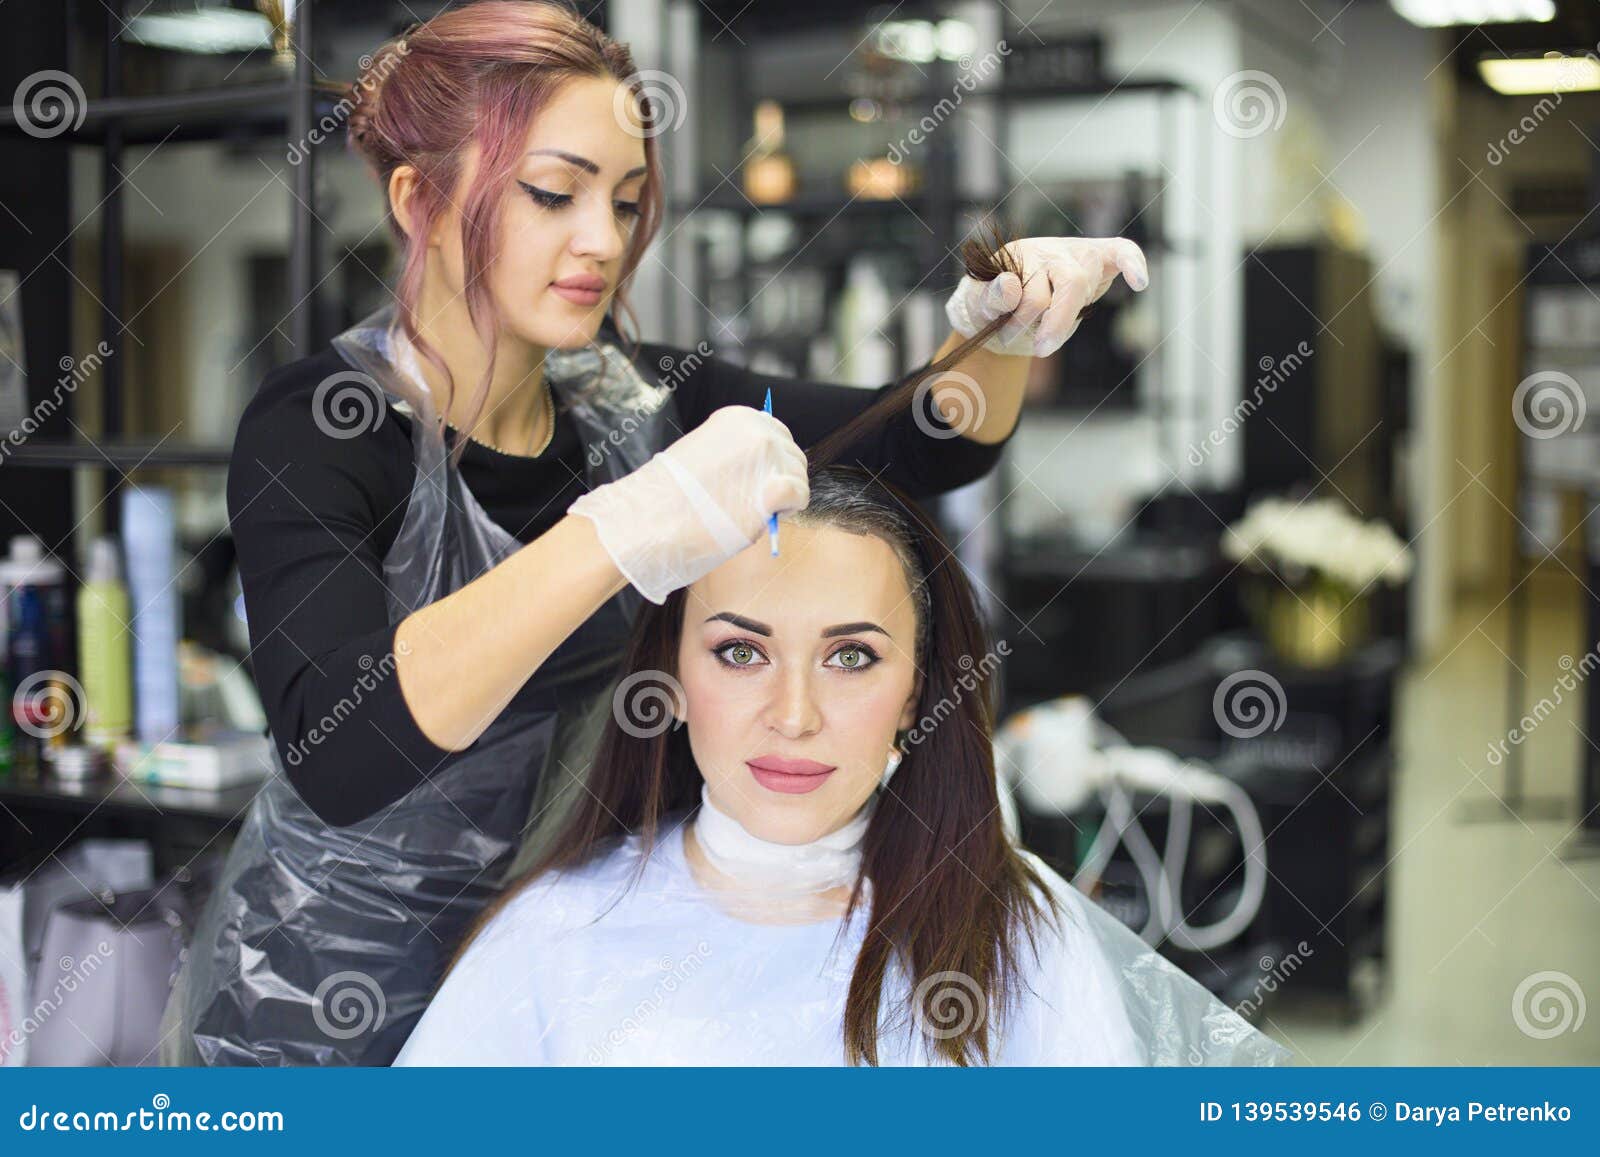 Professional Female Hairdresser Applying Color To Female Customer at Design Hair  Salon, Woman Having Her Hair Dyed Stock Photo - Image of profession,  beautiful: 139539546